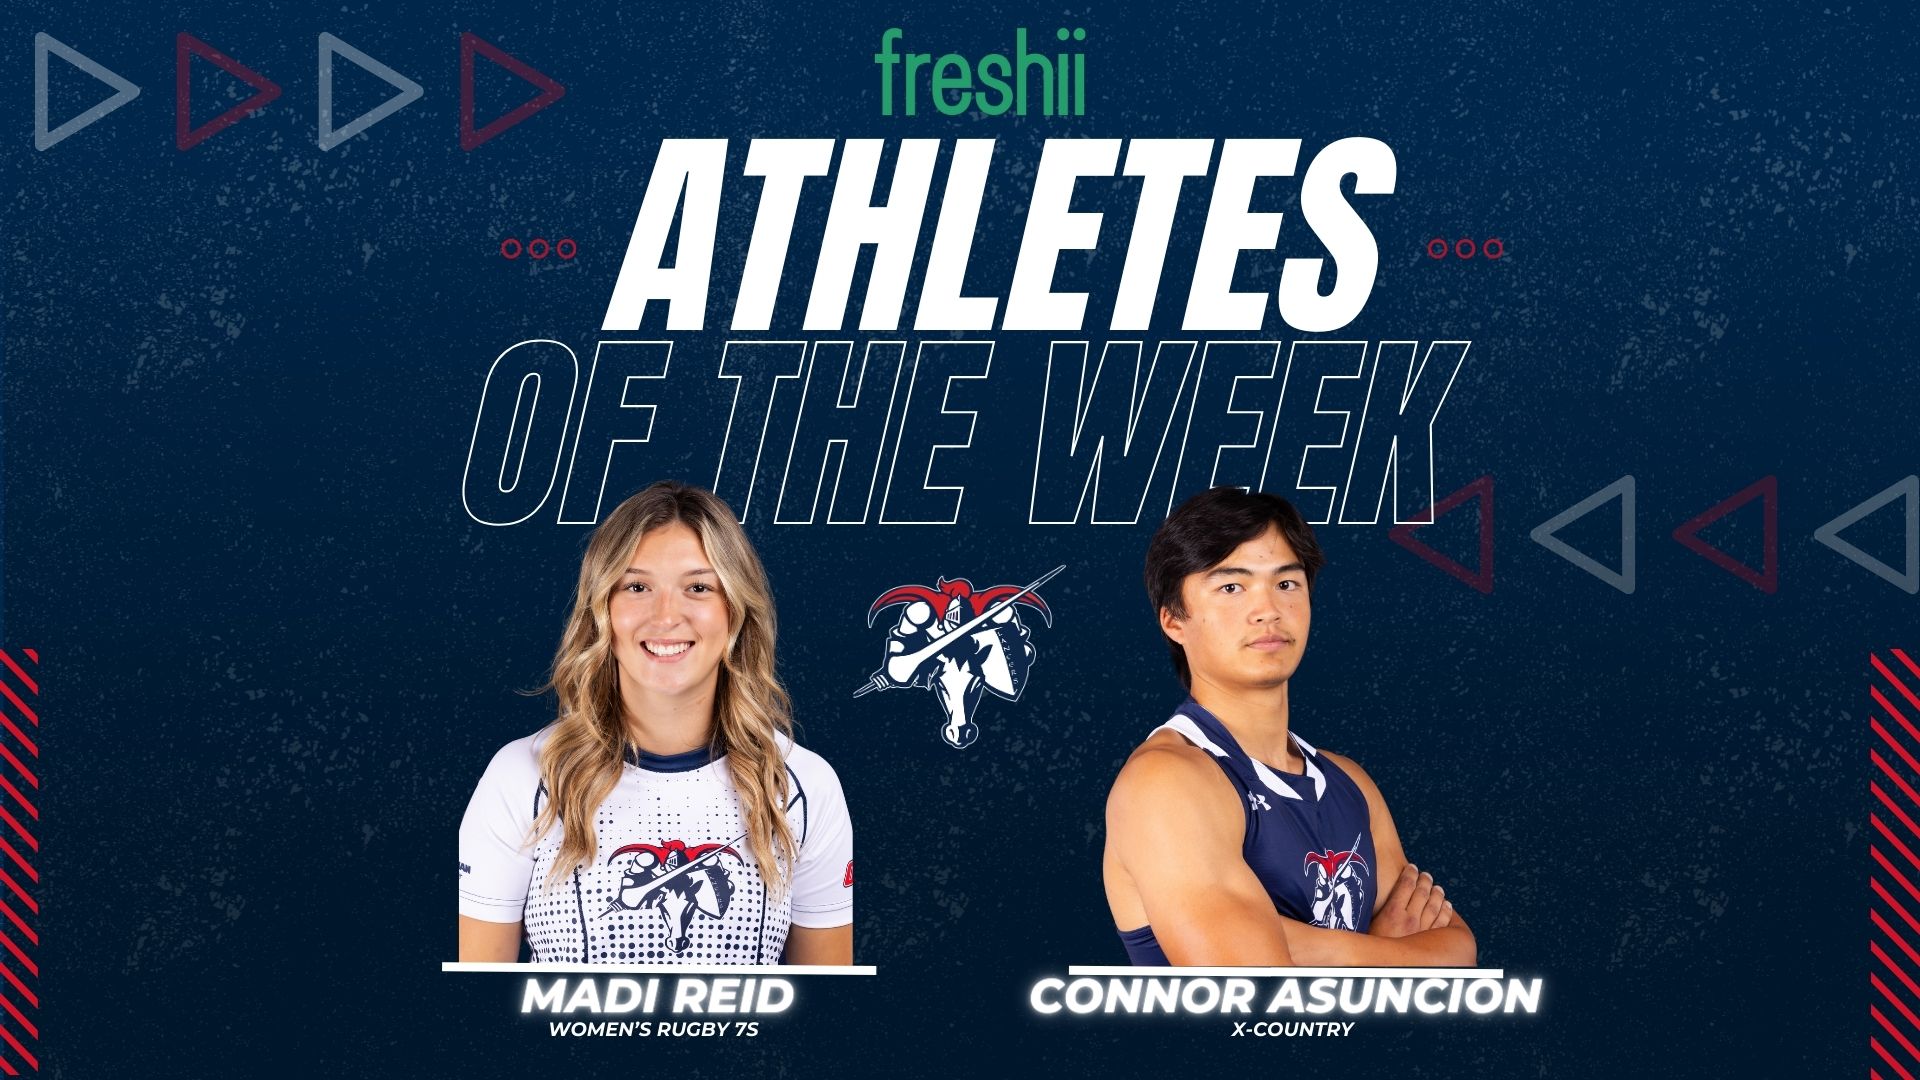 REID AND ASUNCION NAMED ATHLETES OF THE WEEK